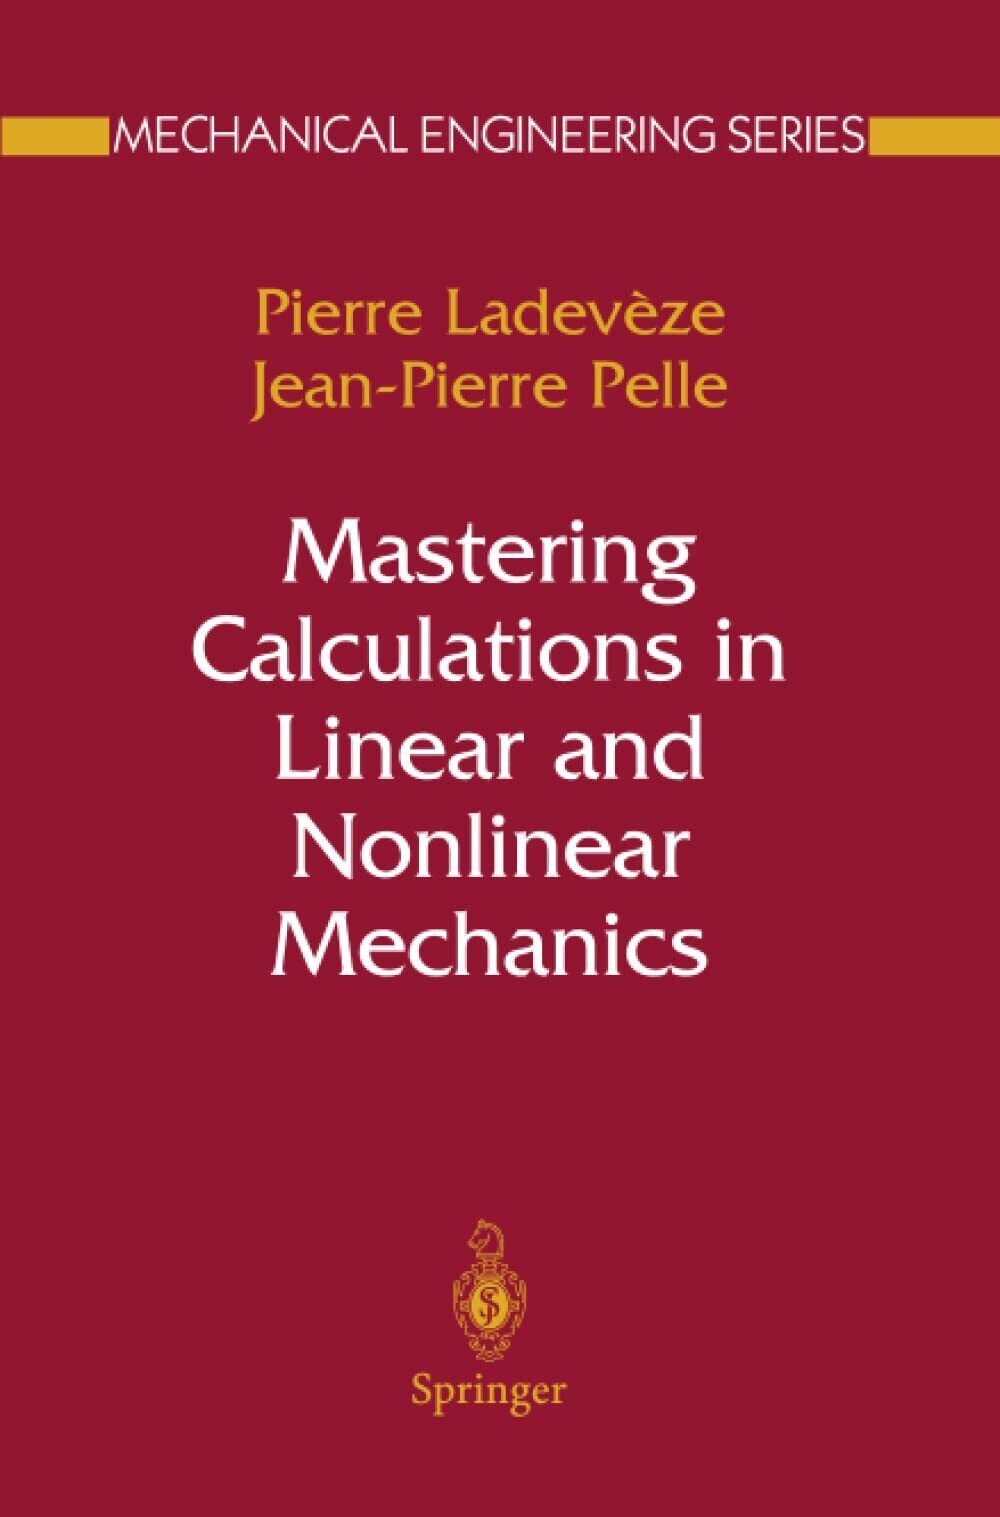 Mastering Calculations in Linear and Nonlinear Mechanics - Springer, 2014